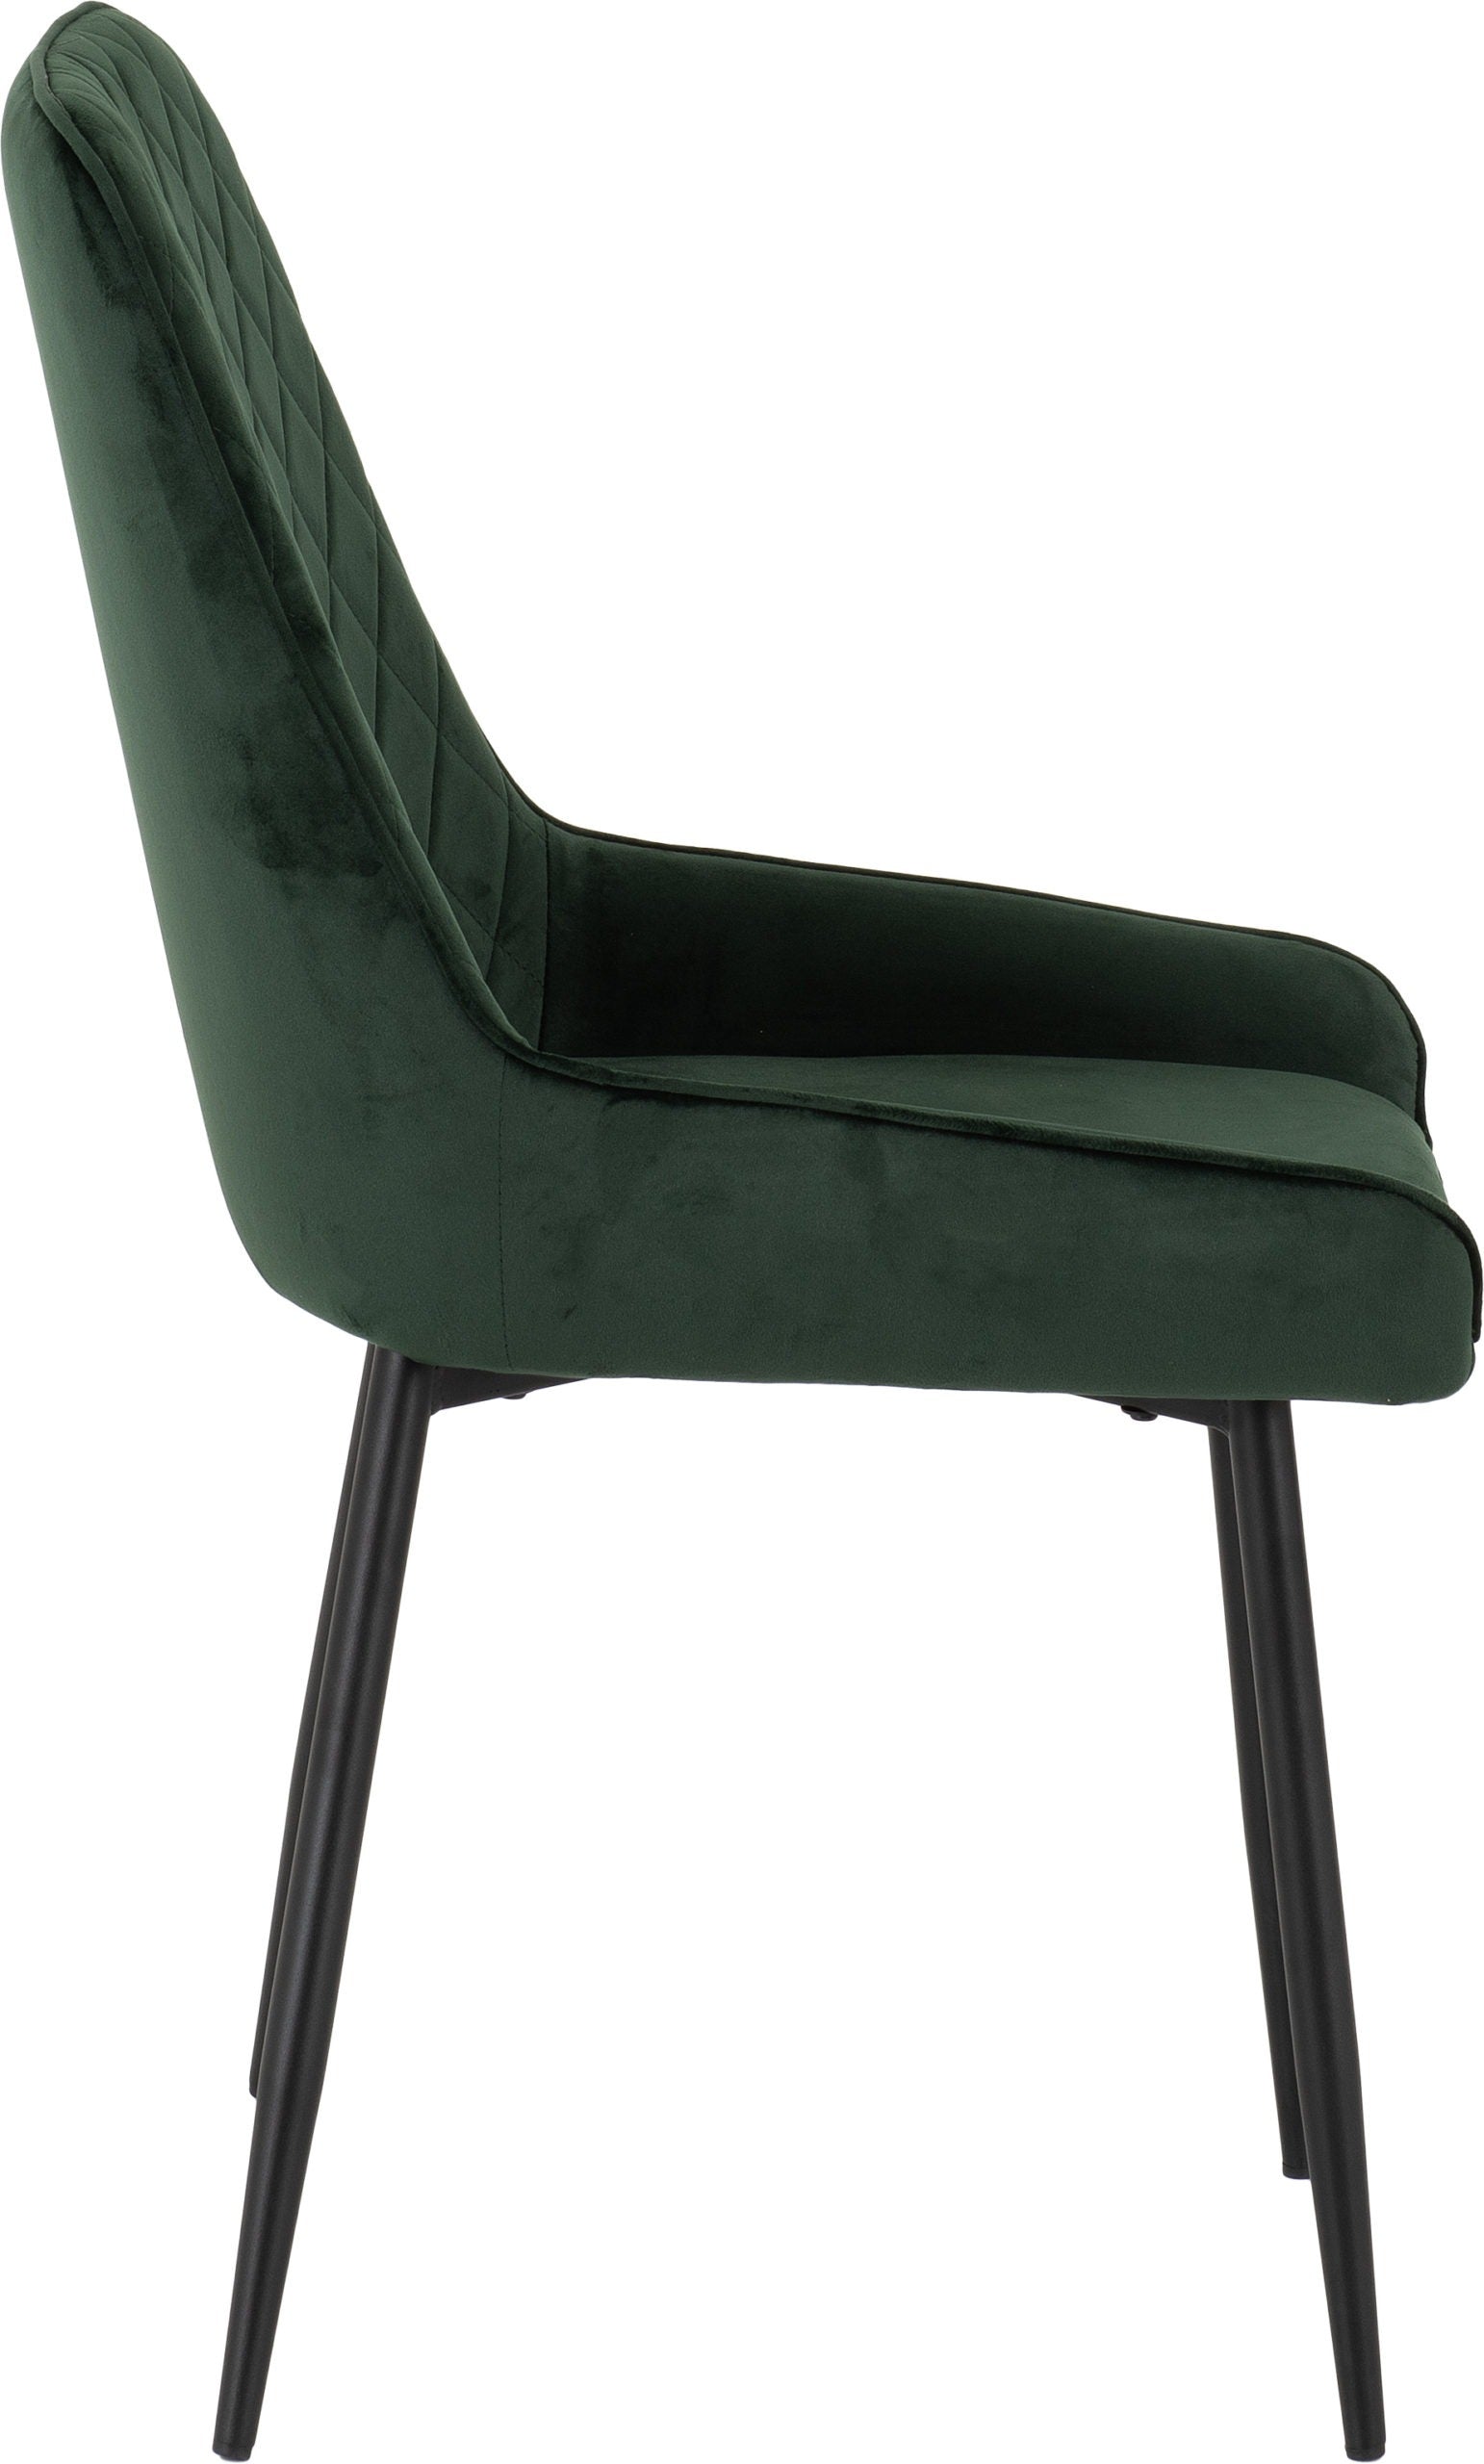 Avery Chair Emerald Green- The Right Buy Store